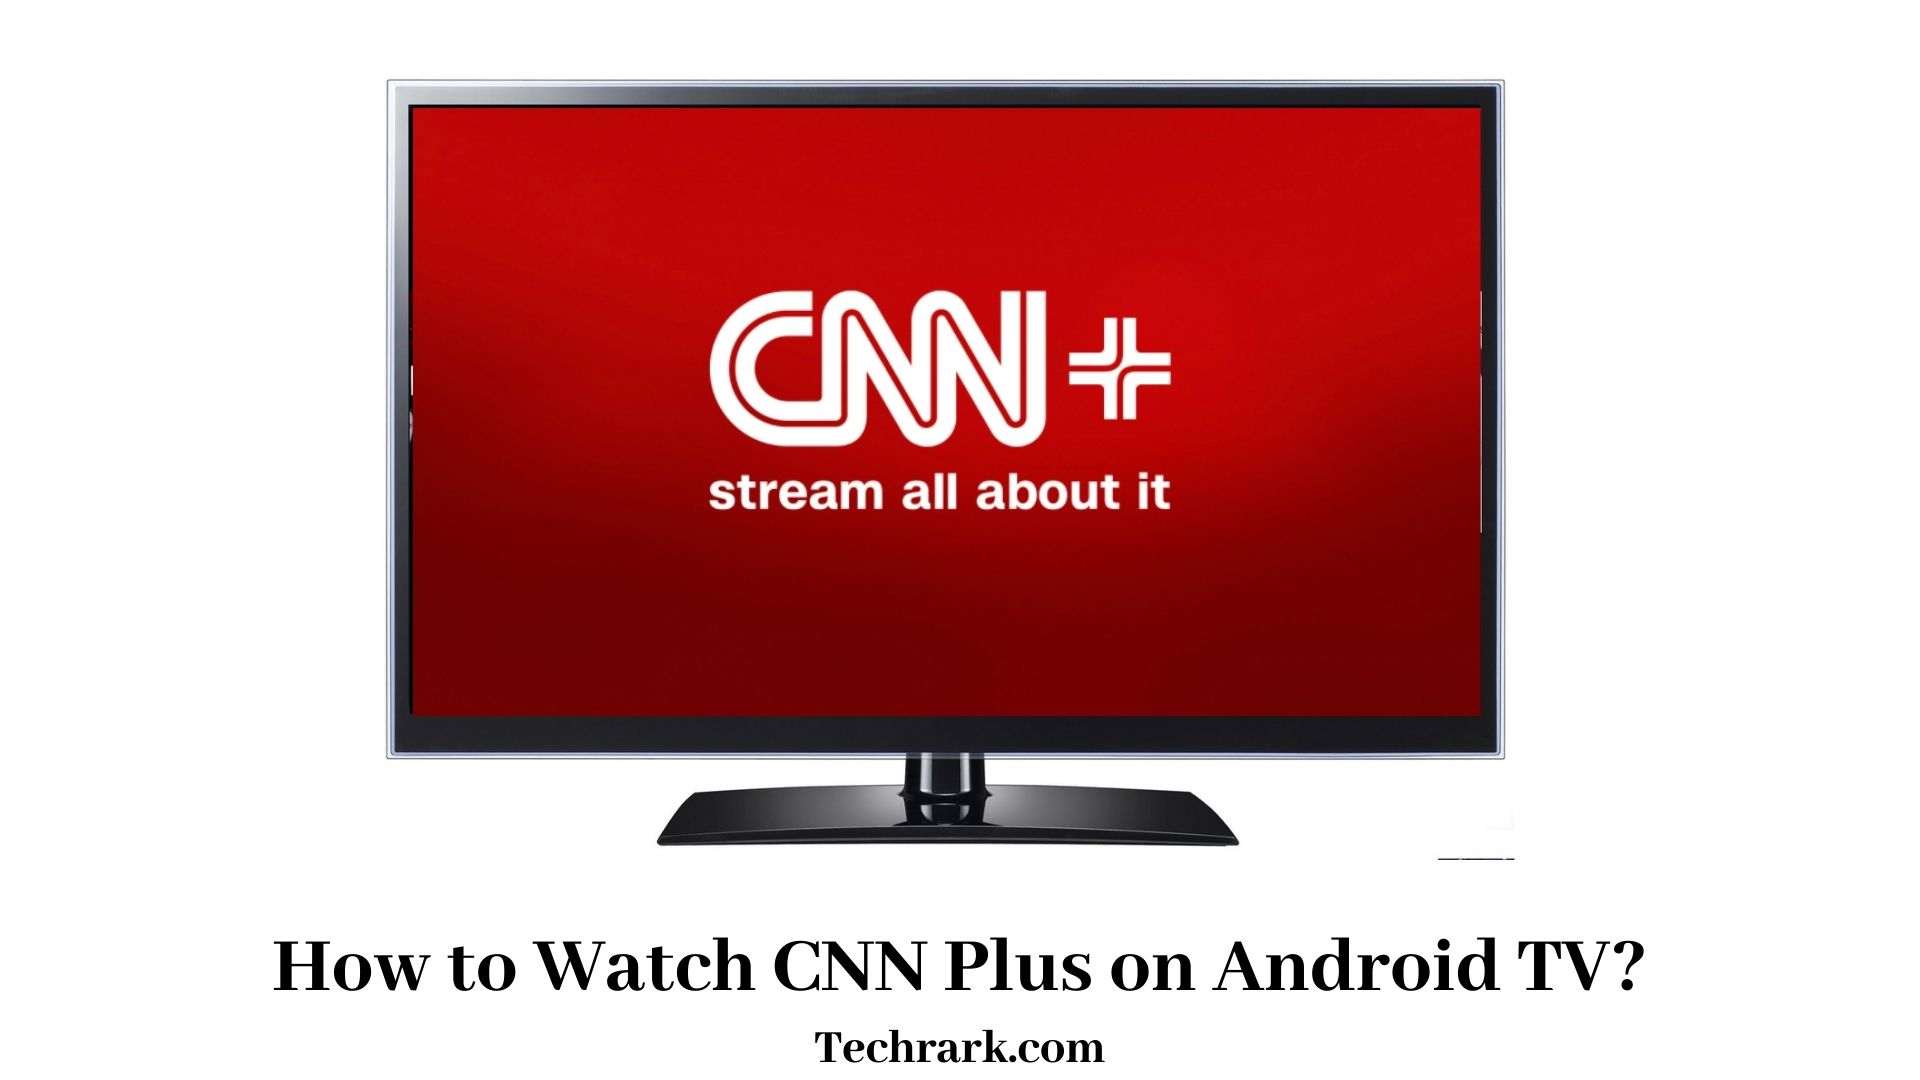 CNN+ on Android TV